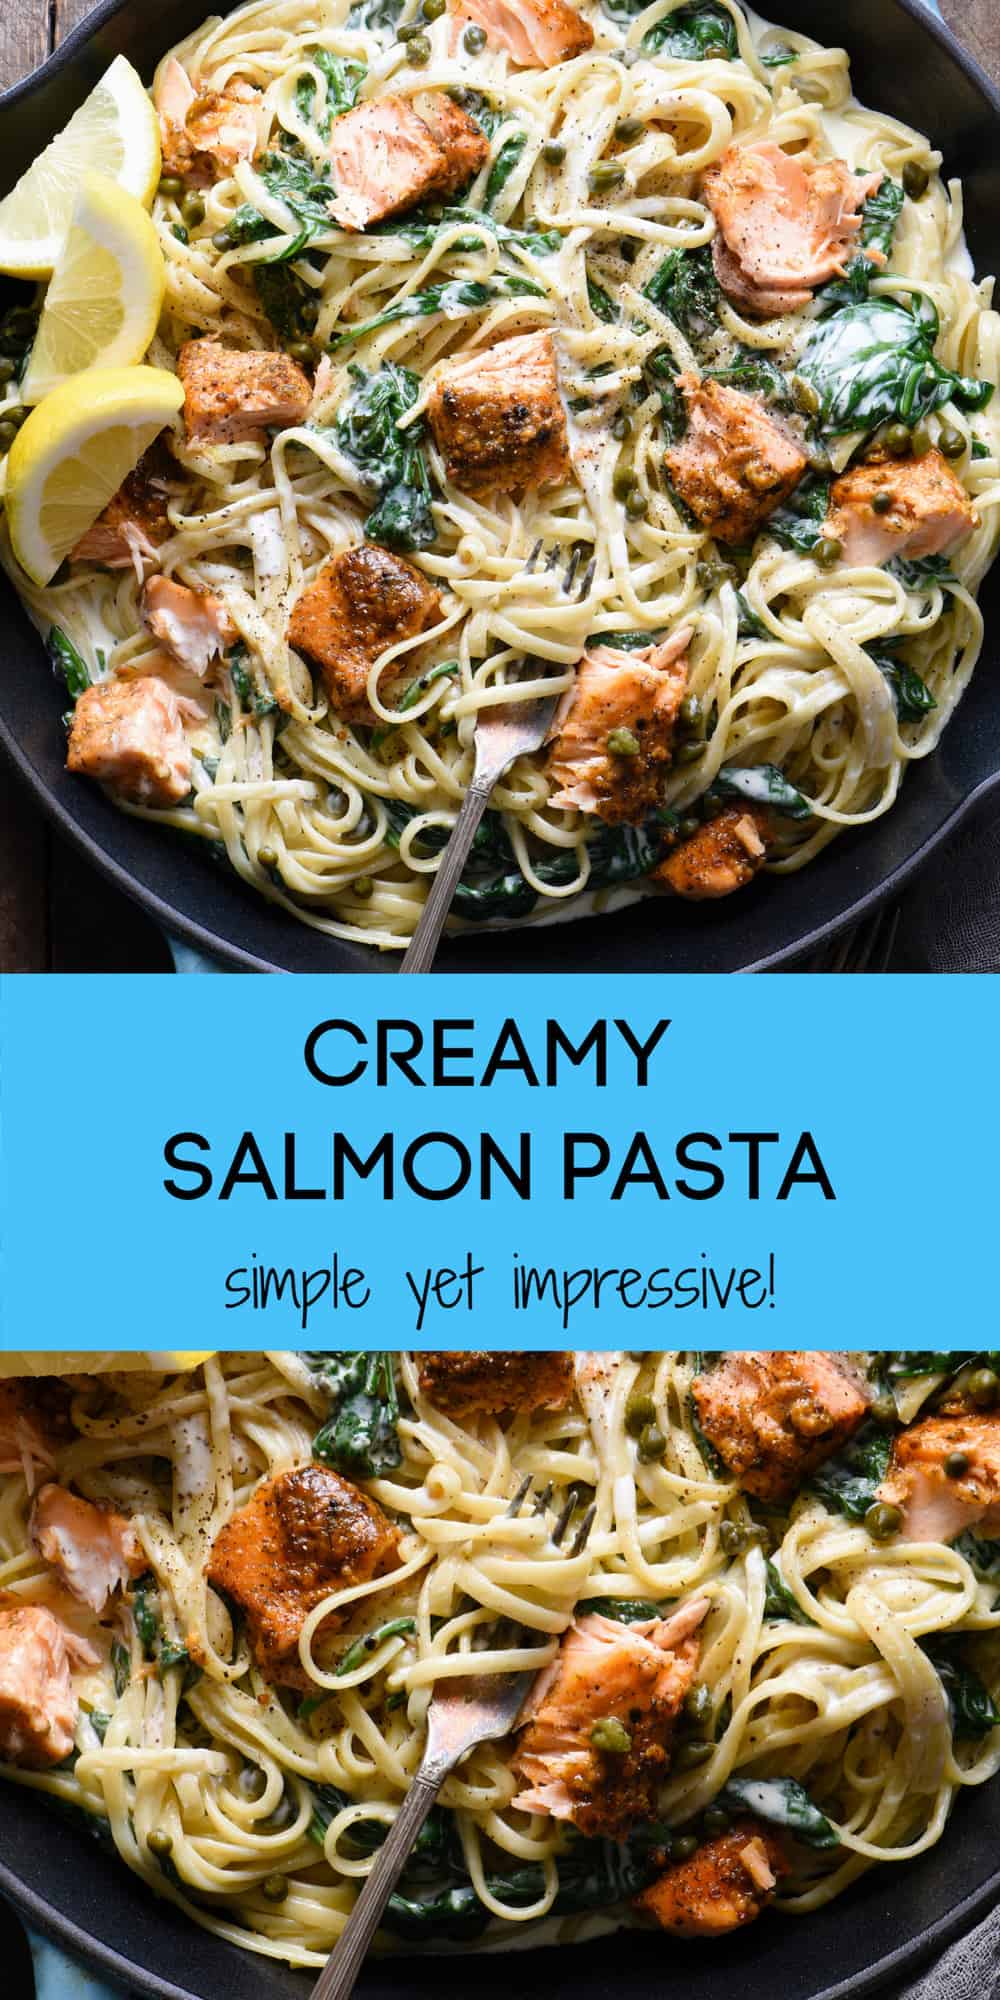 This Creamy Salmon Pasta recipe is a great way to show off what a "home chef" you are. Simple yet impressive, this is a perfect recipe for a date night at home. | foxeslovelemons.com